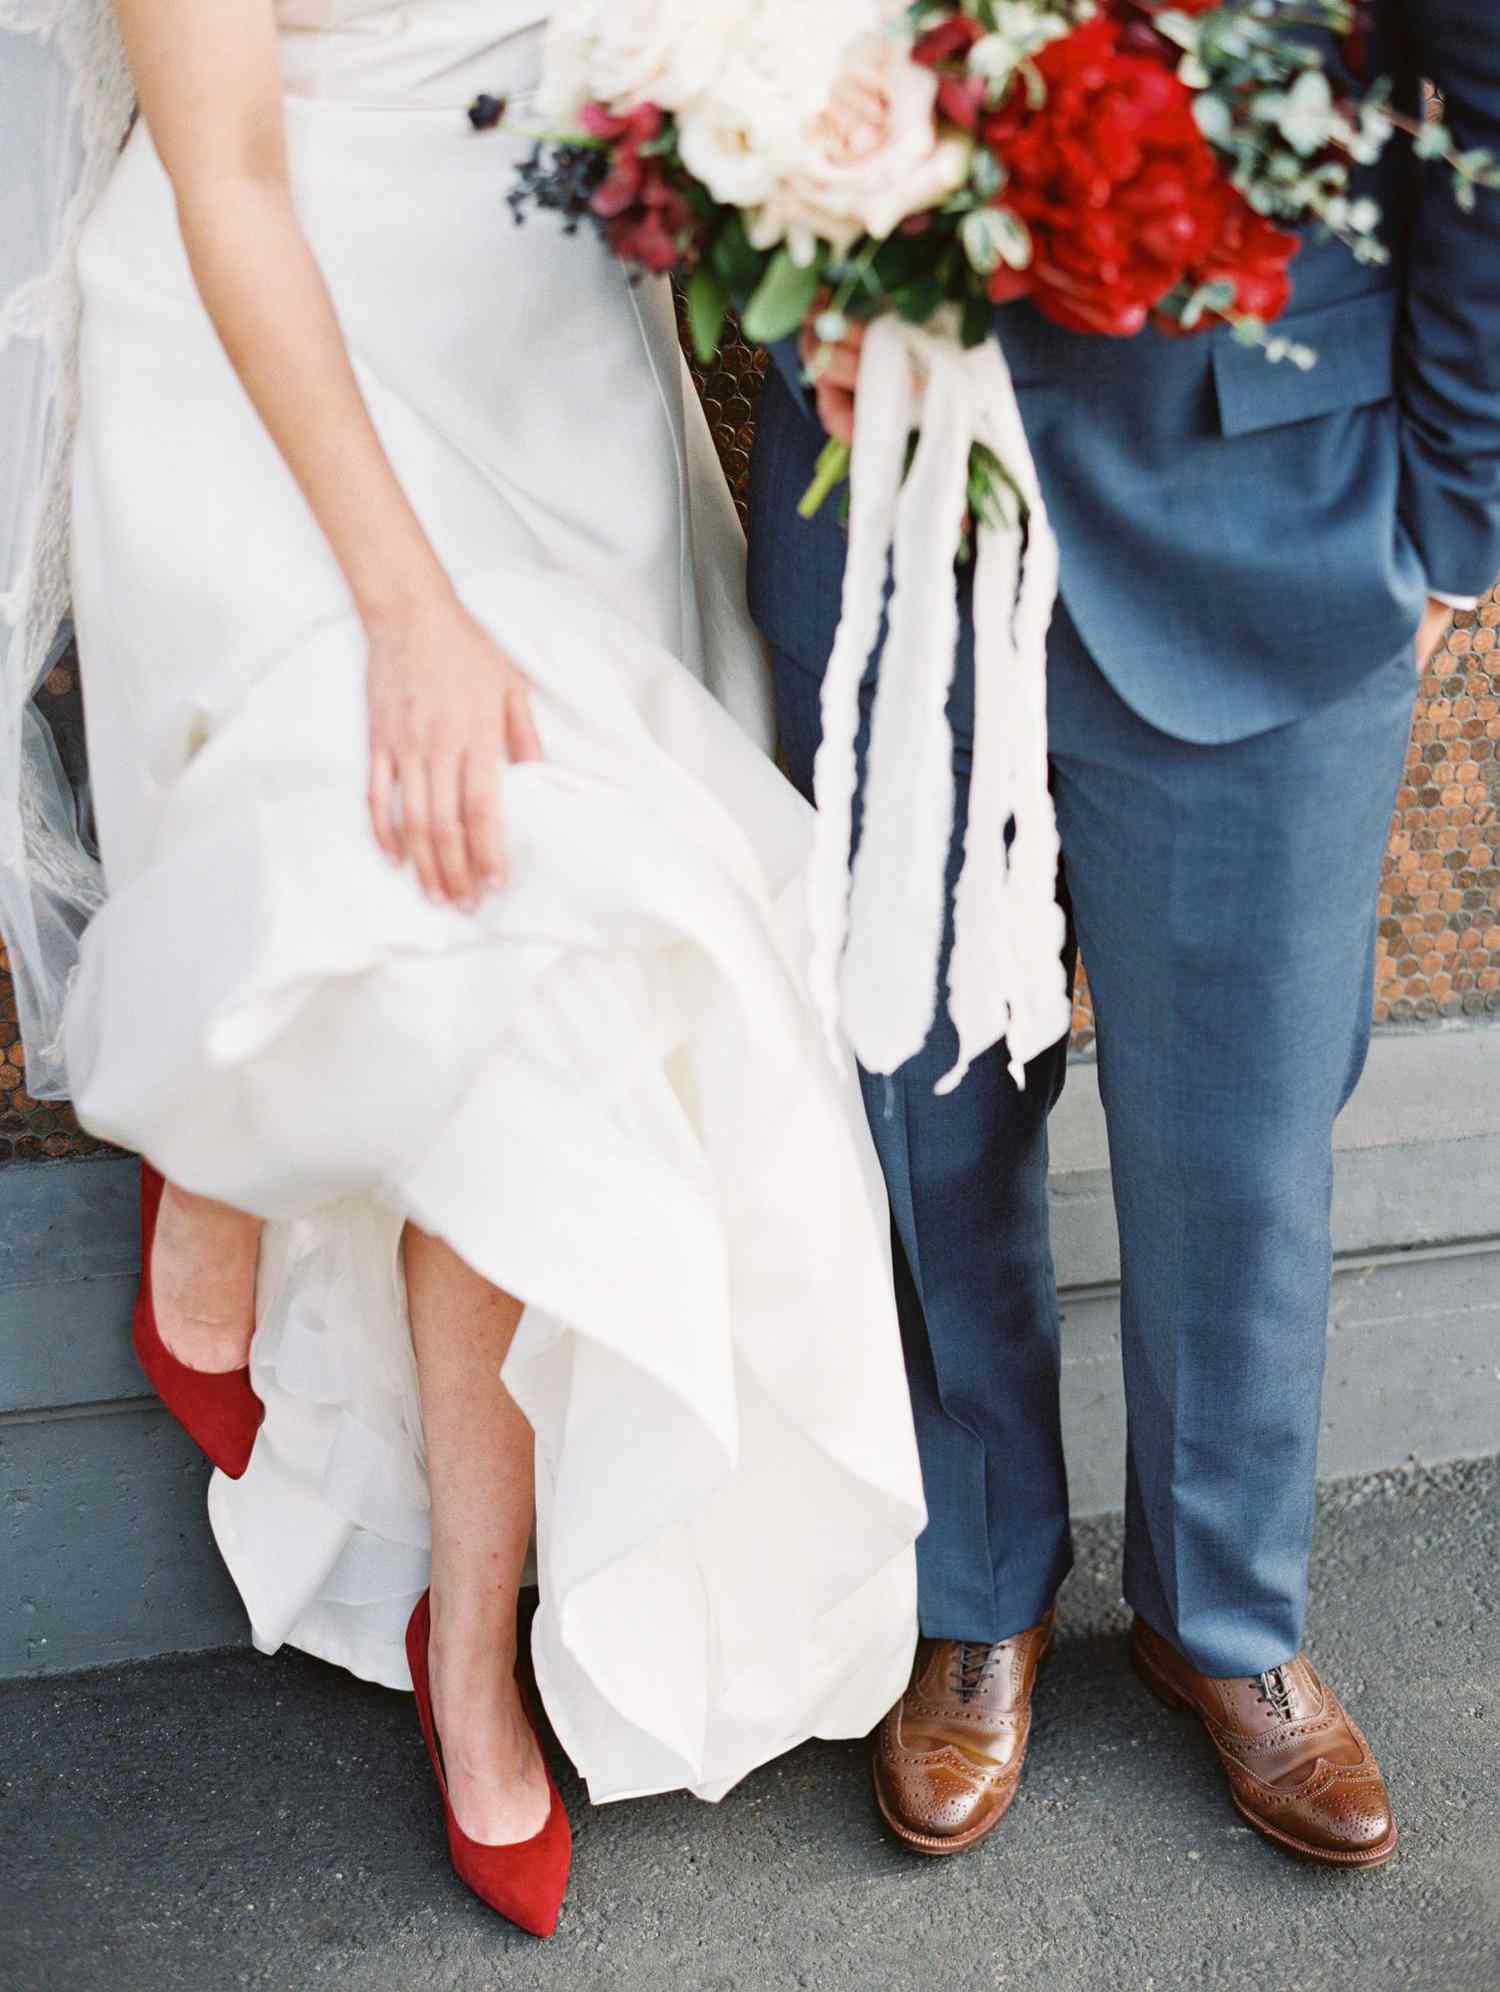 Can You Wear Flats on Your Wedding Day? Here's What the Expert Says |  Martha Stewart